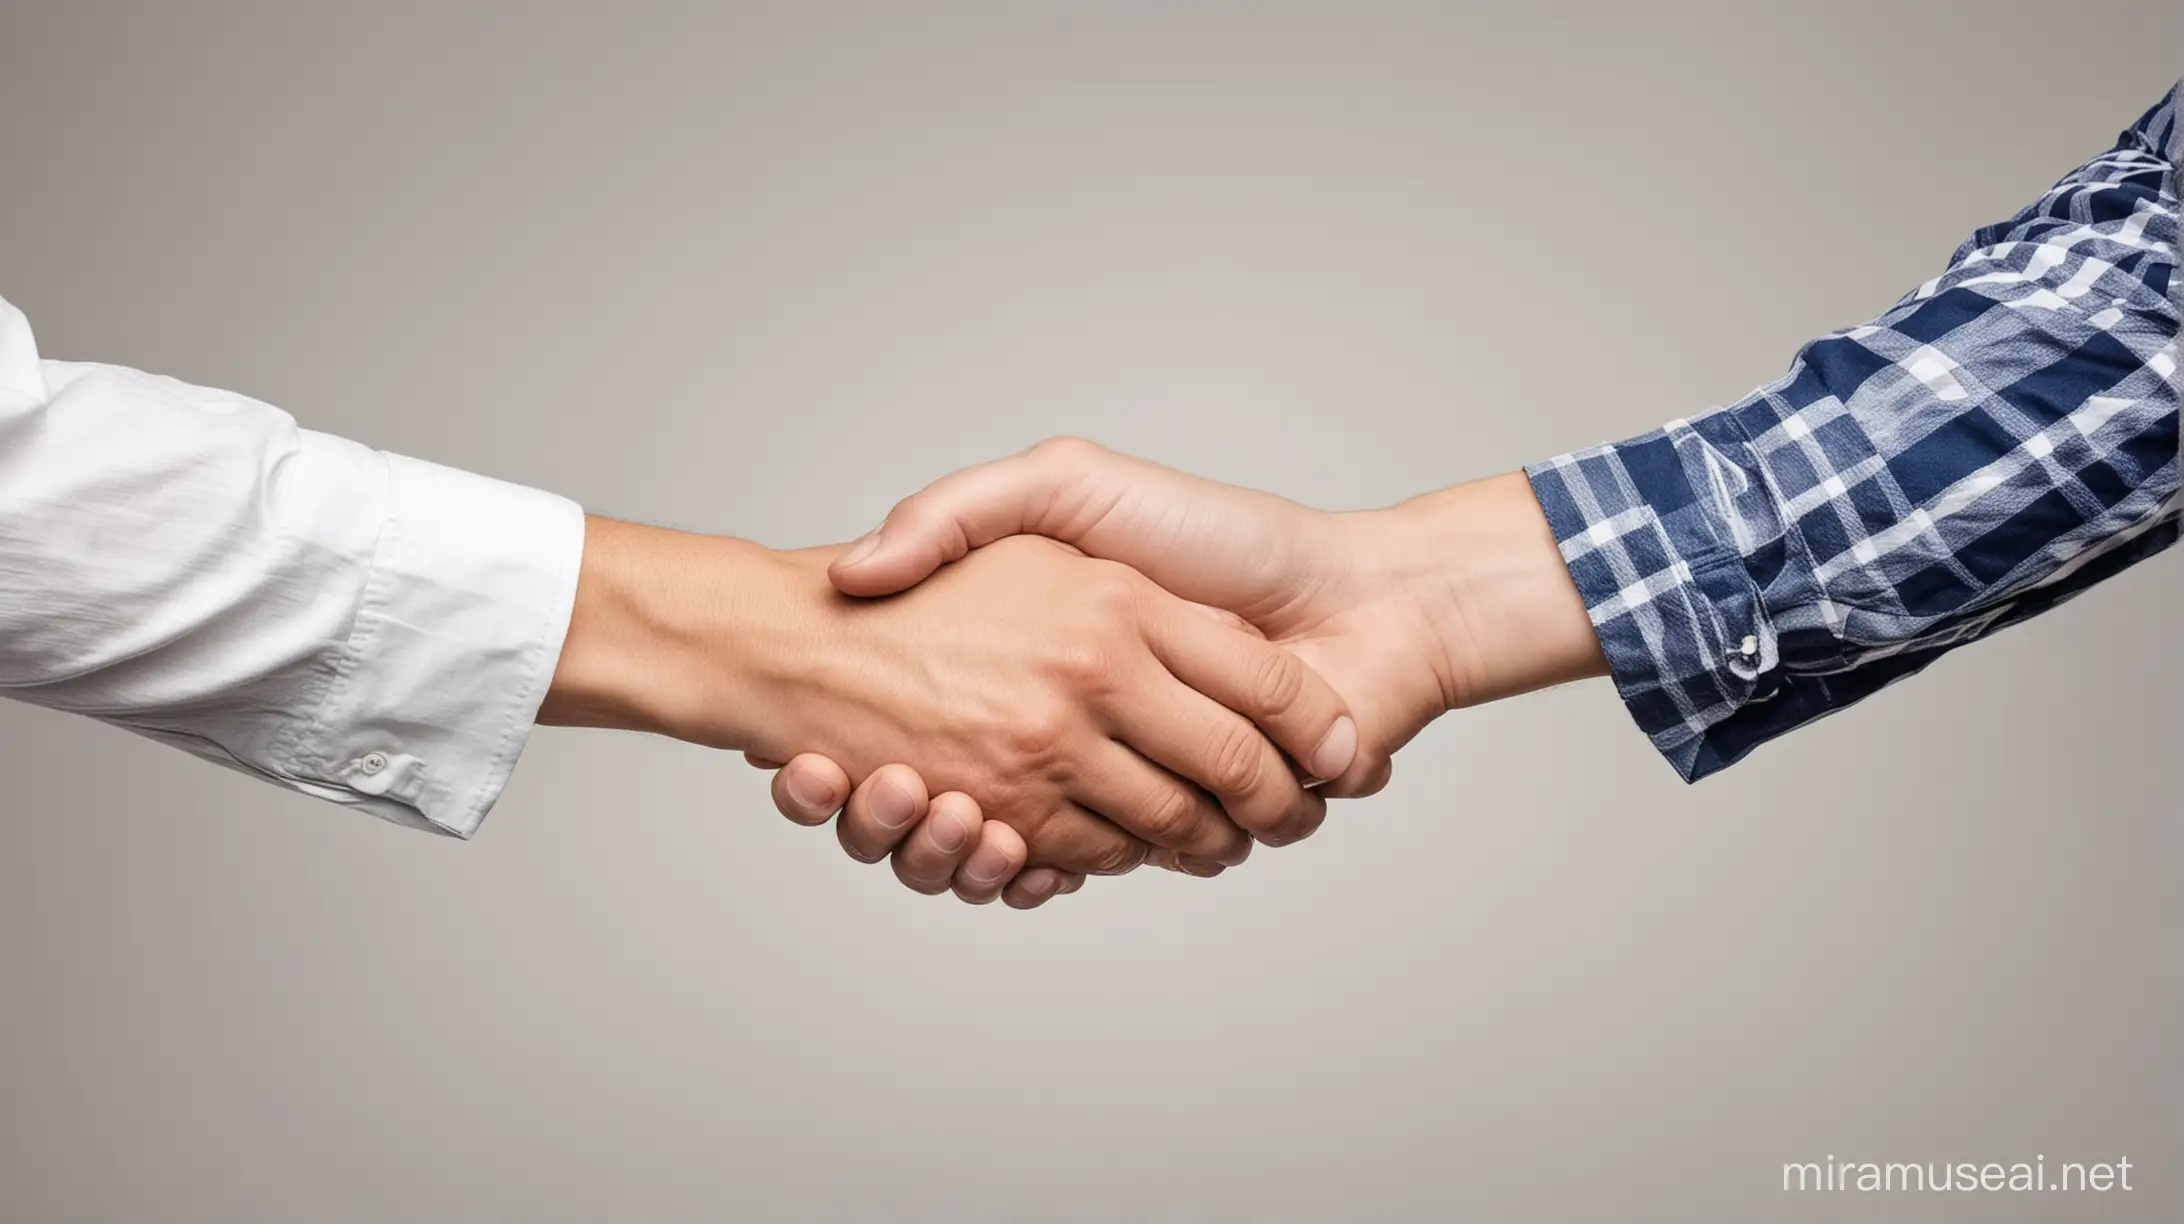 Professional and Farmer Shaking Hands in Unity on White Background